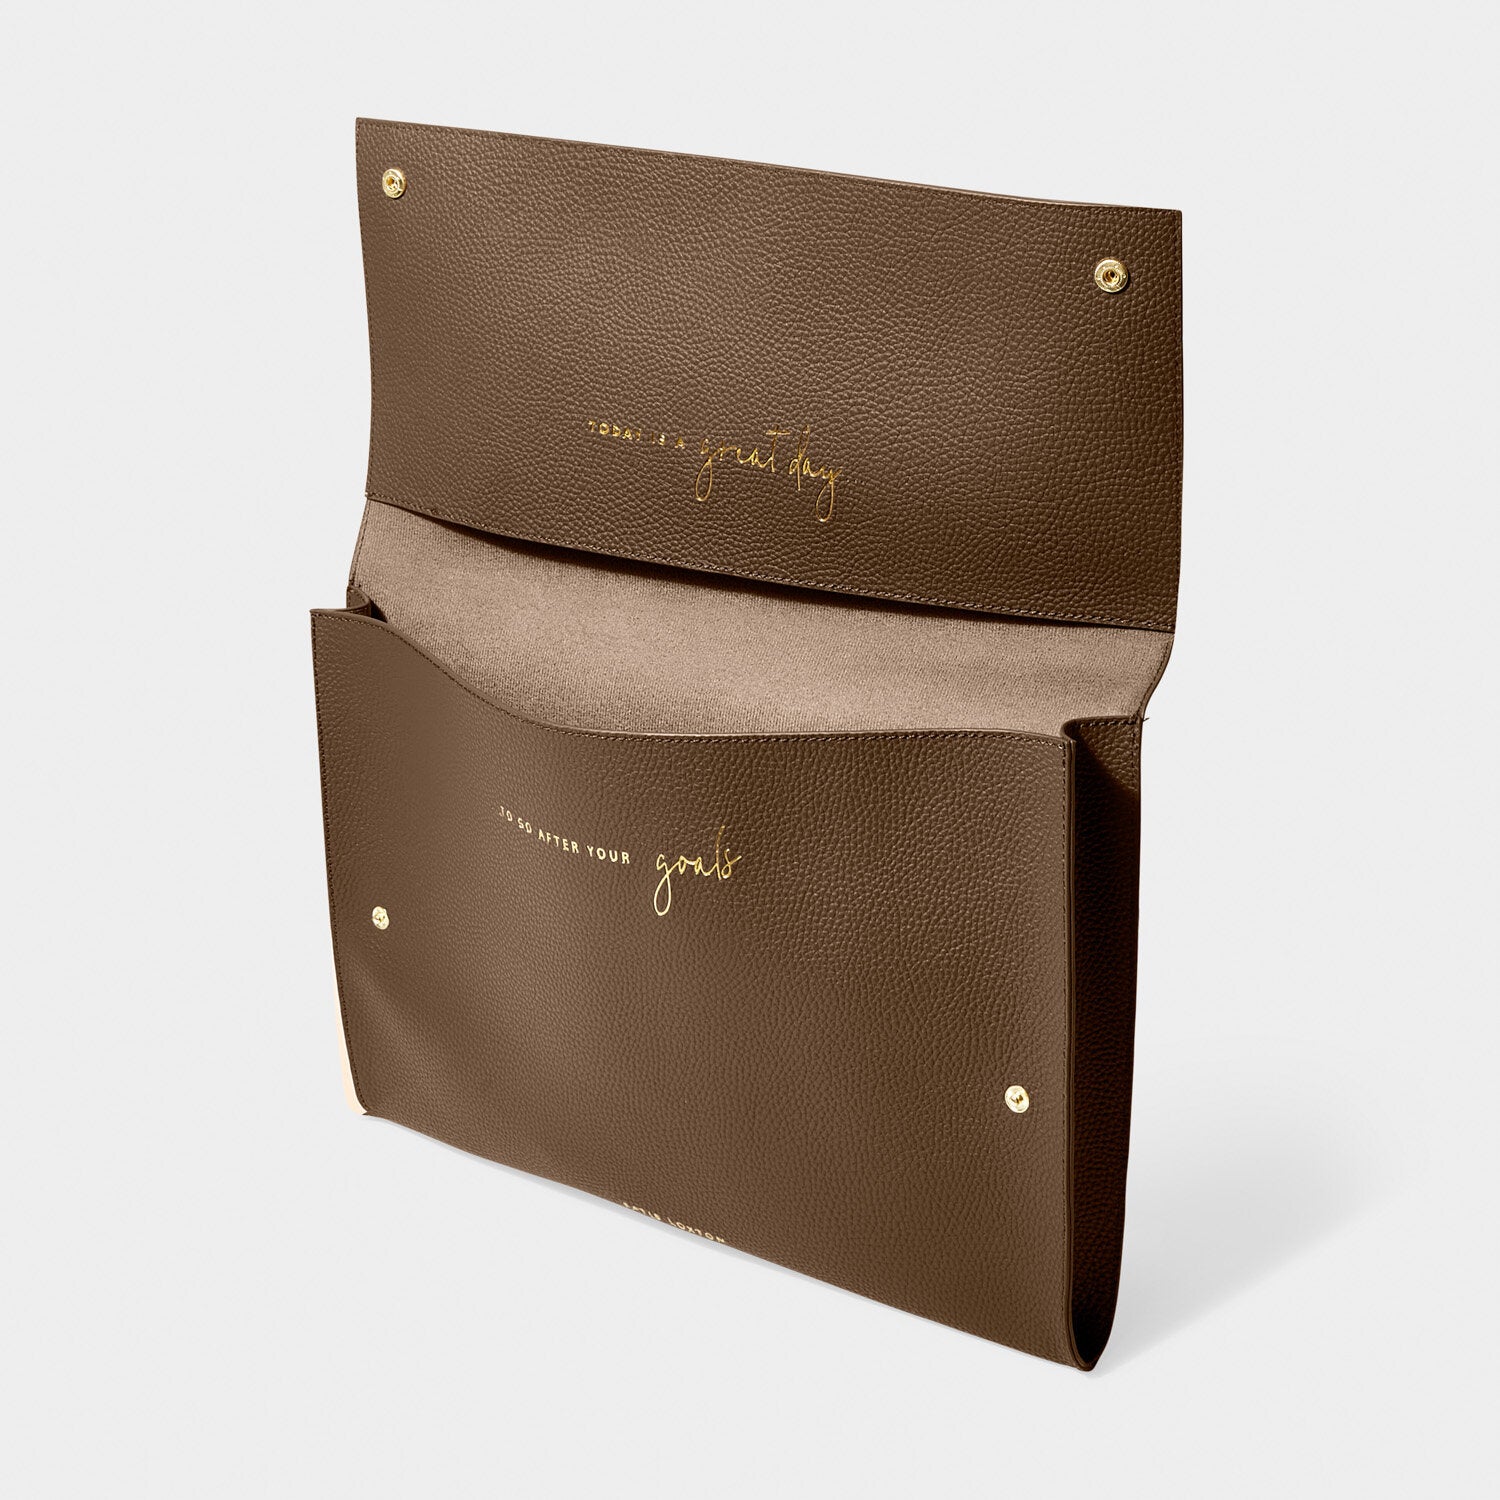 Laptop Case 'Today Is A Great Day...To Go After Your Goals' - Katie Loxton